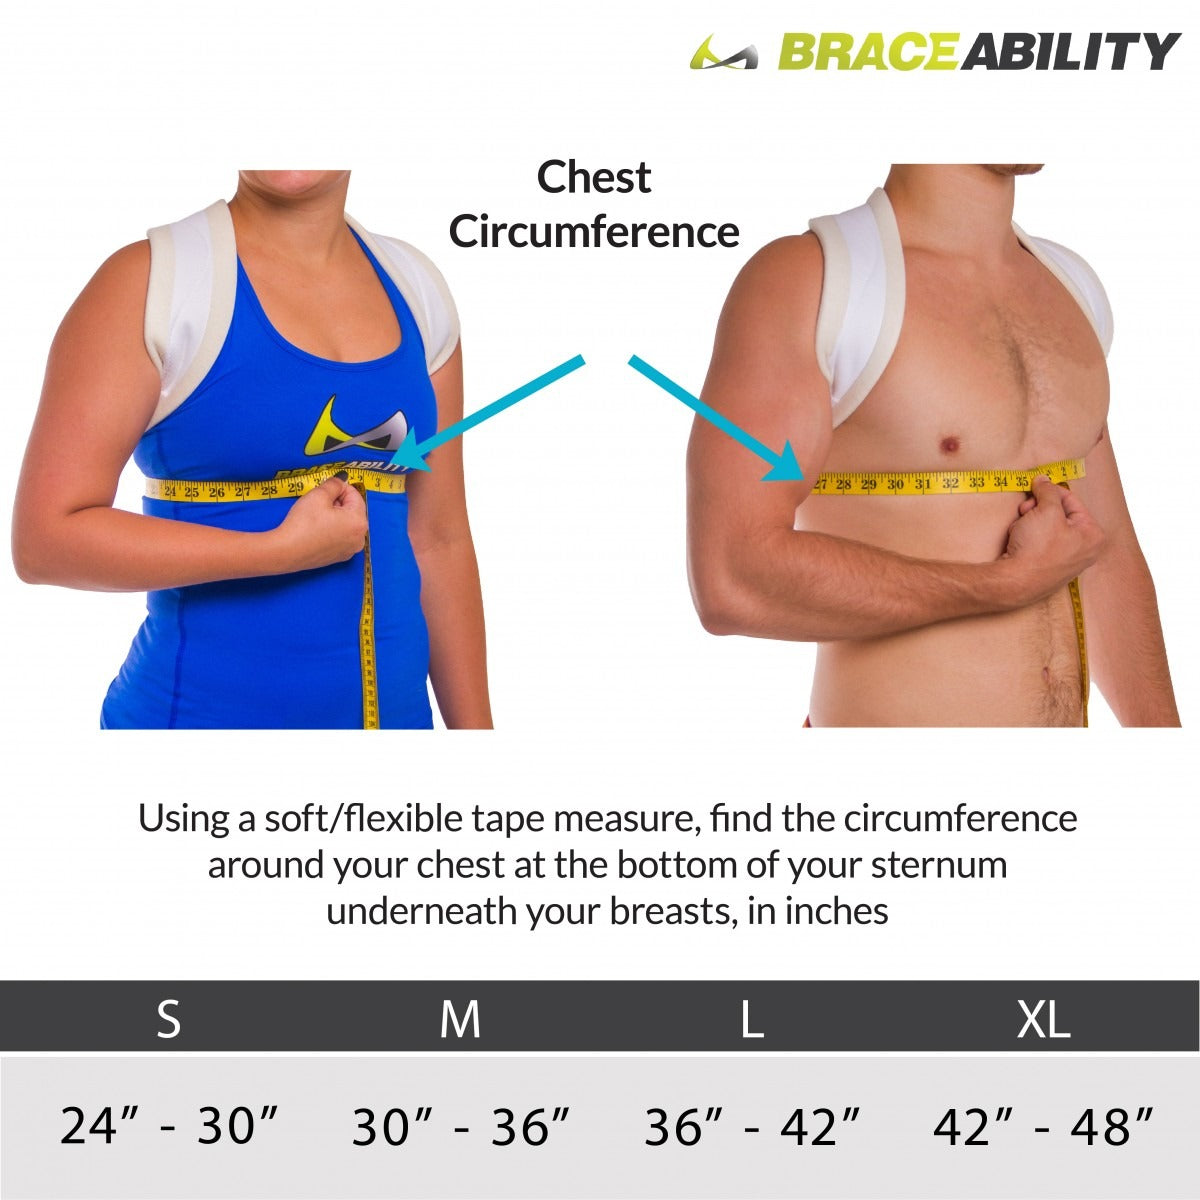 Sizing chart clavicle fracture sling for treating broken collar bones. Available in sizes S-XL.